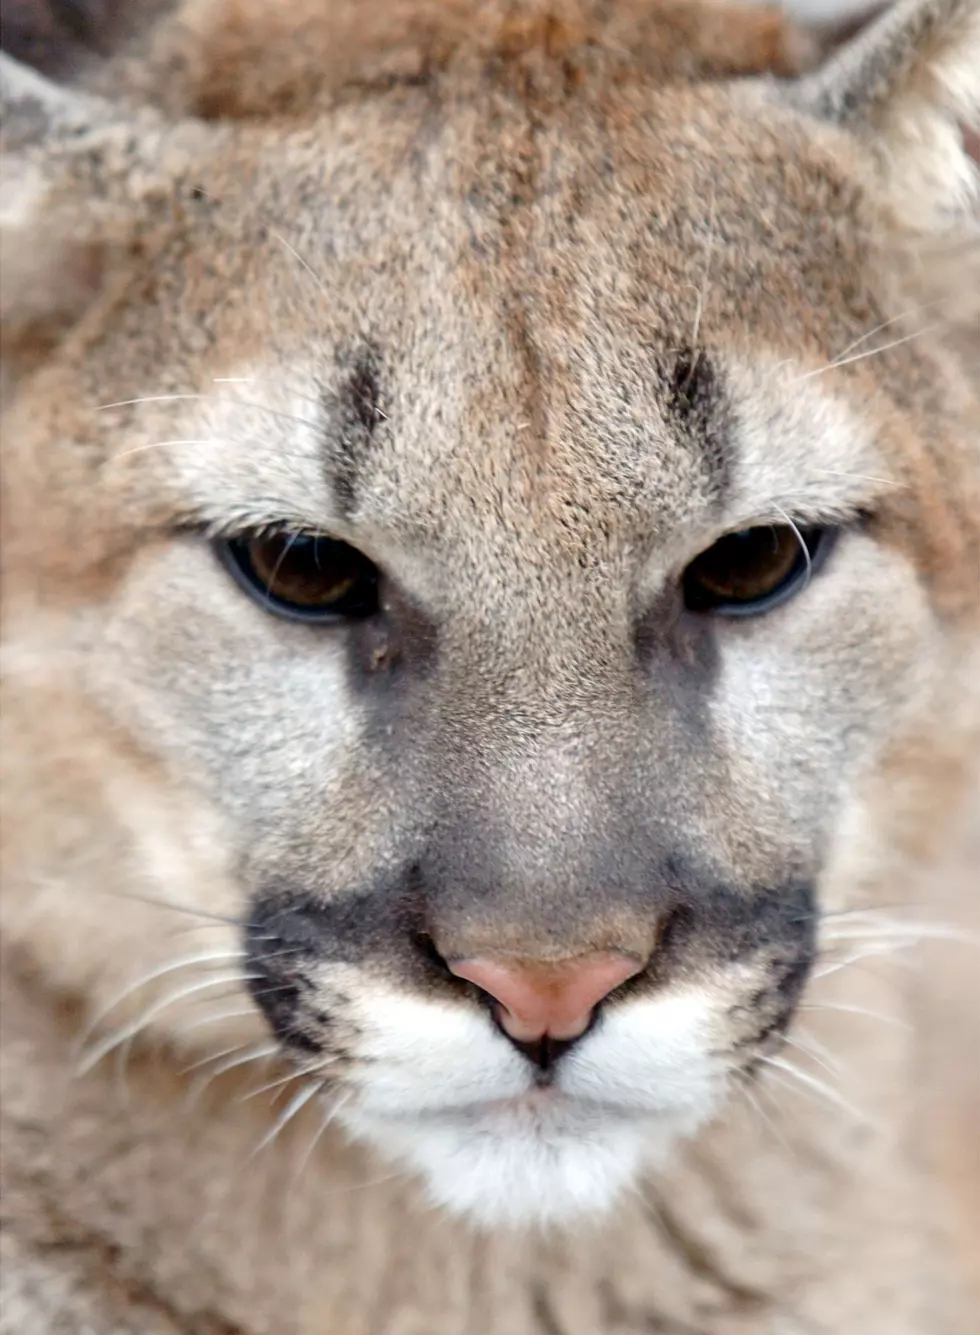 Mountain Lion Sighting Prompts Caution from Idaho Fish and Game